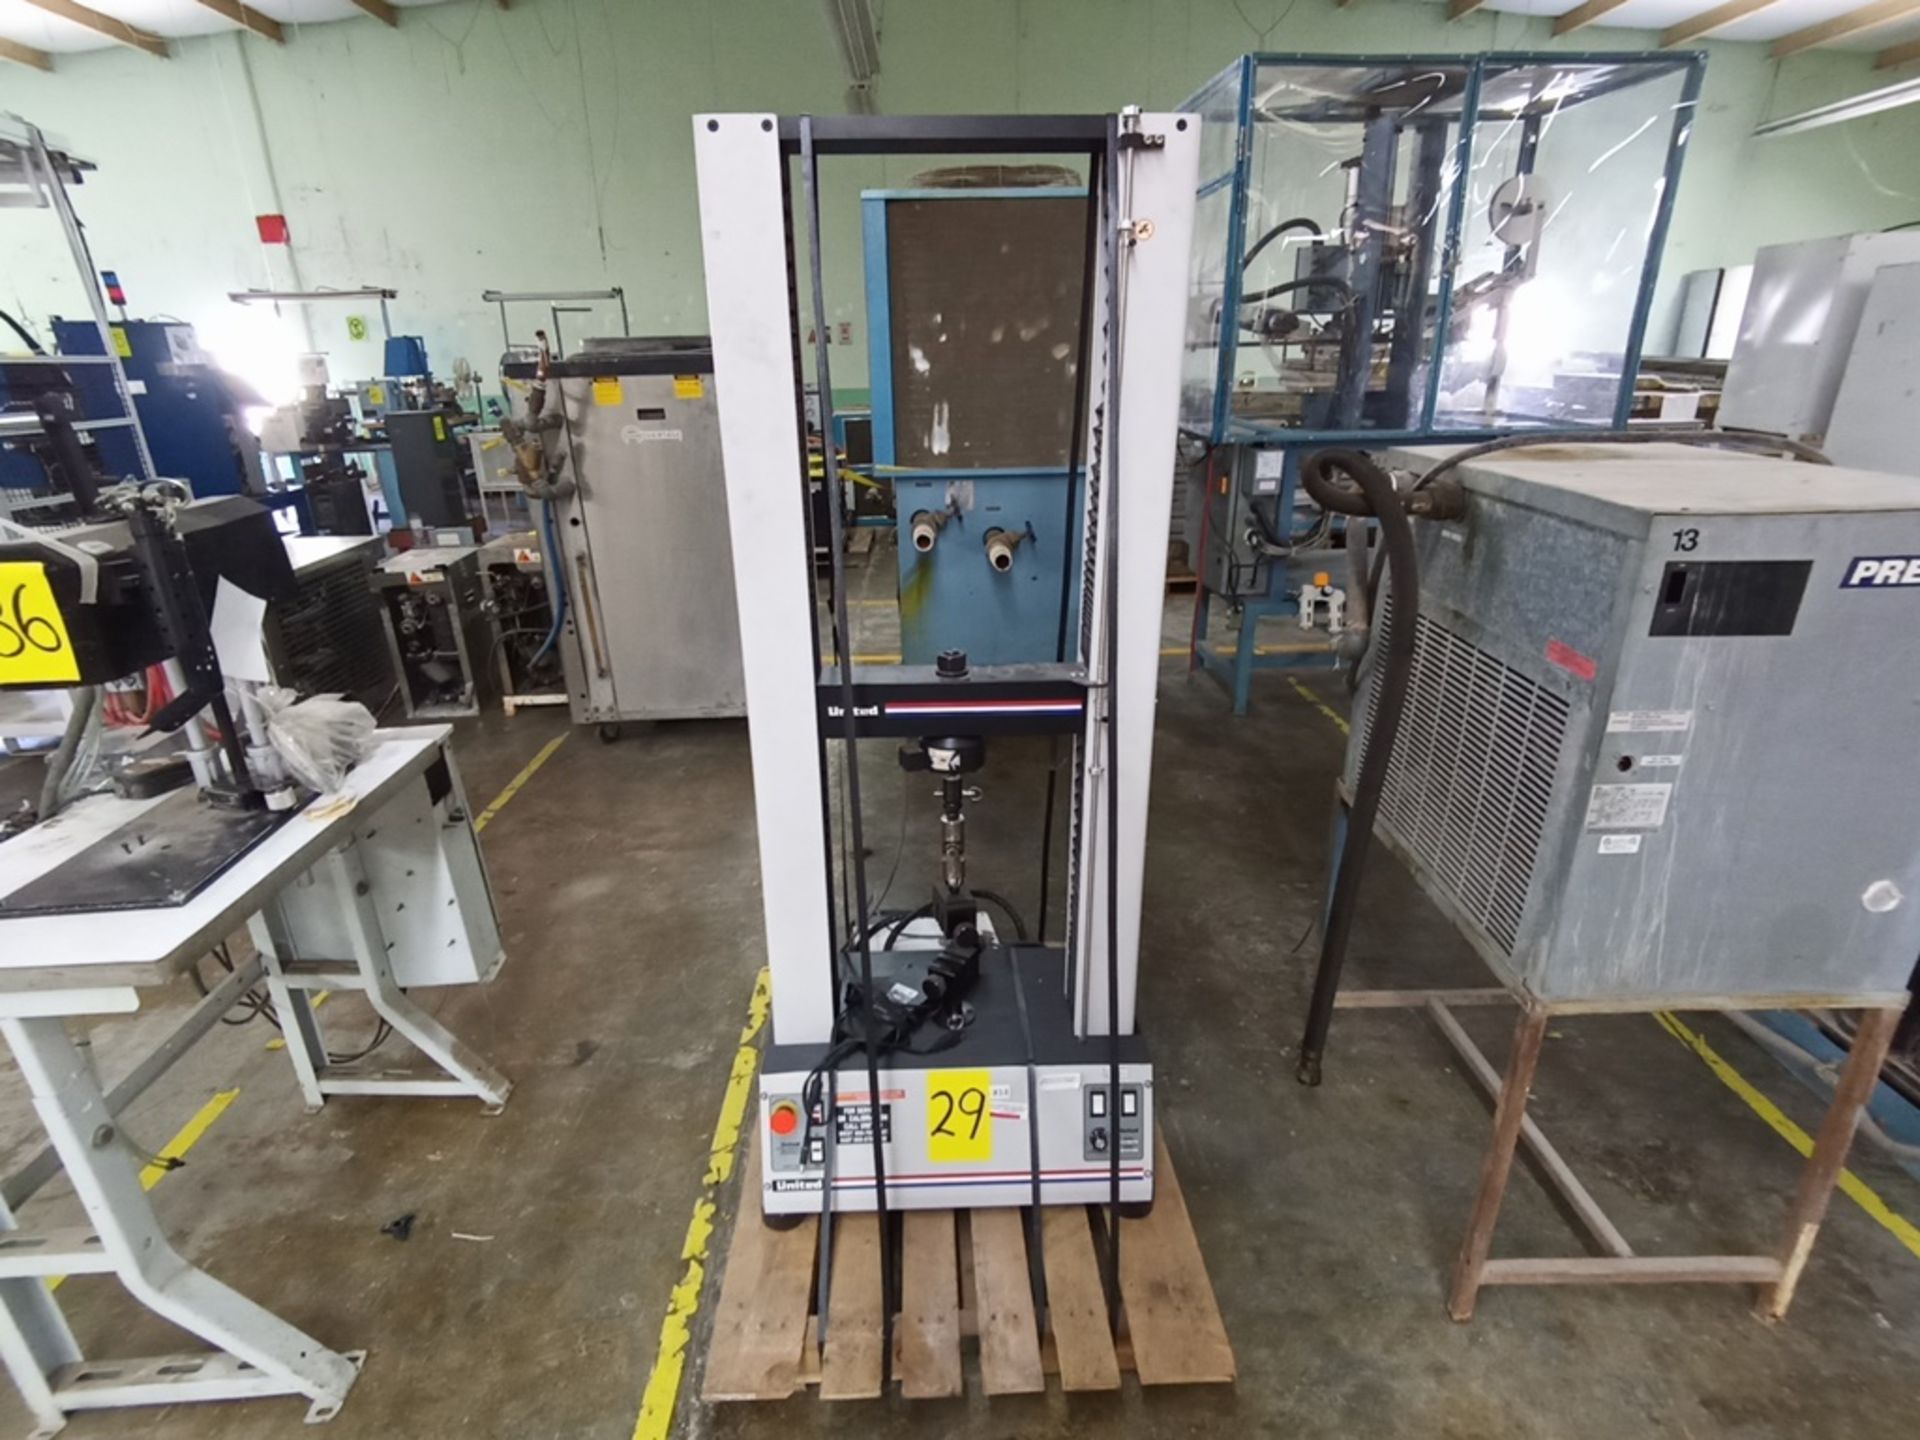 Bench top electromechanical accession machine, Model SSTM-1 Capacity of 1,125lbf